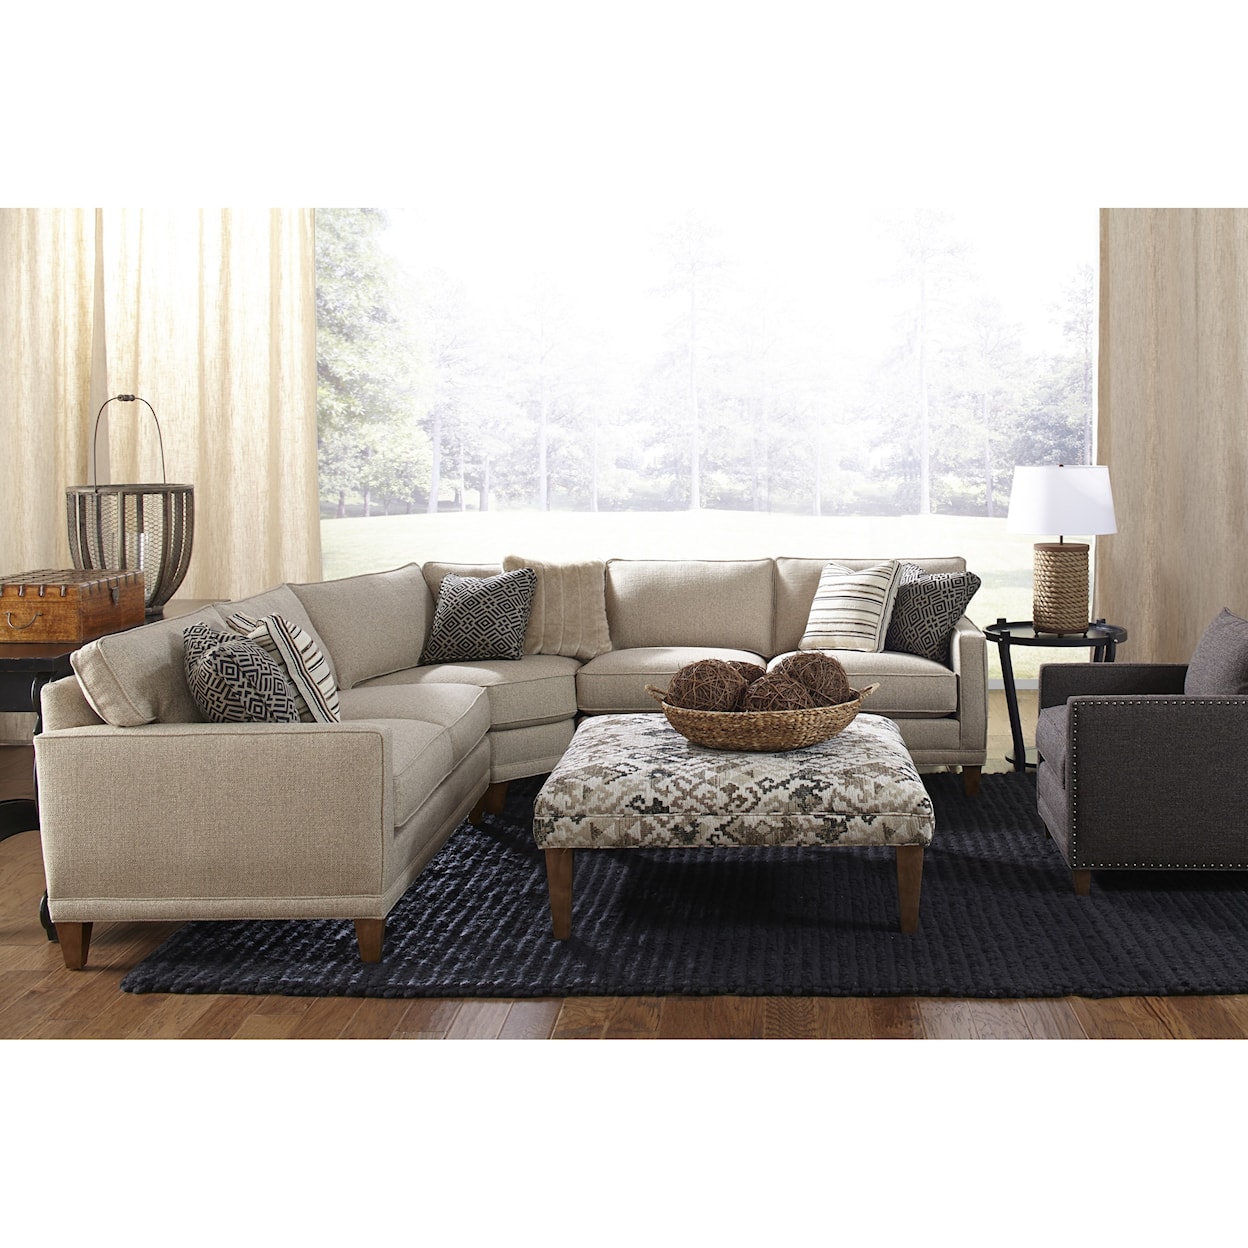 Rowe Townsend Three Piece Sectional Sofa